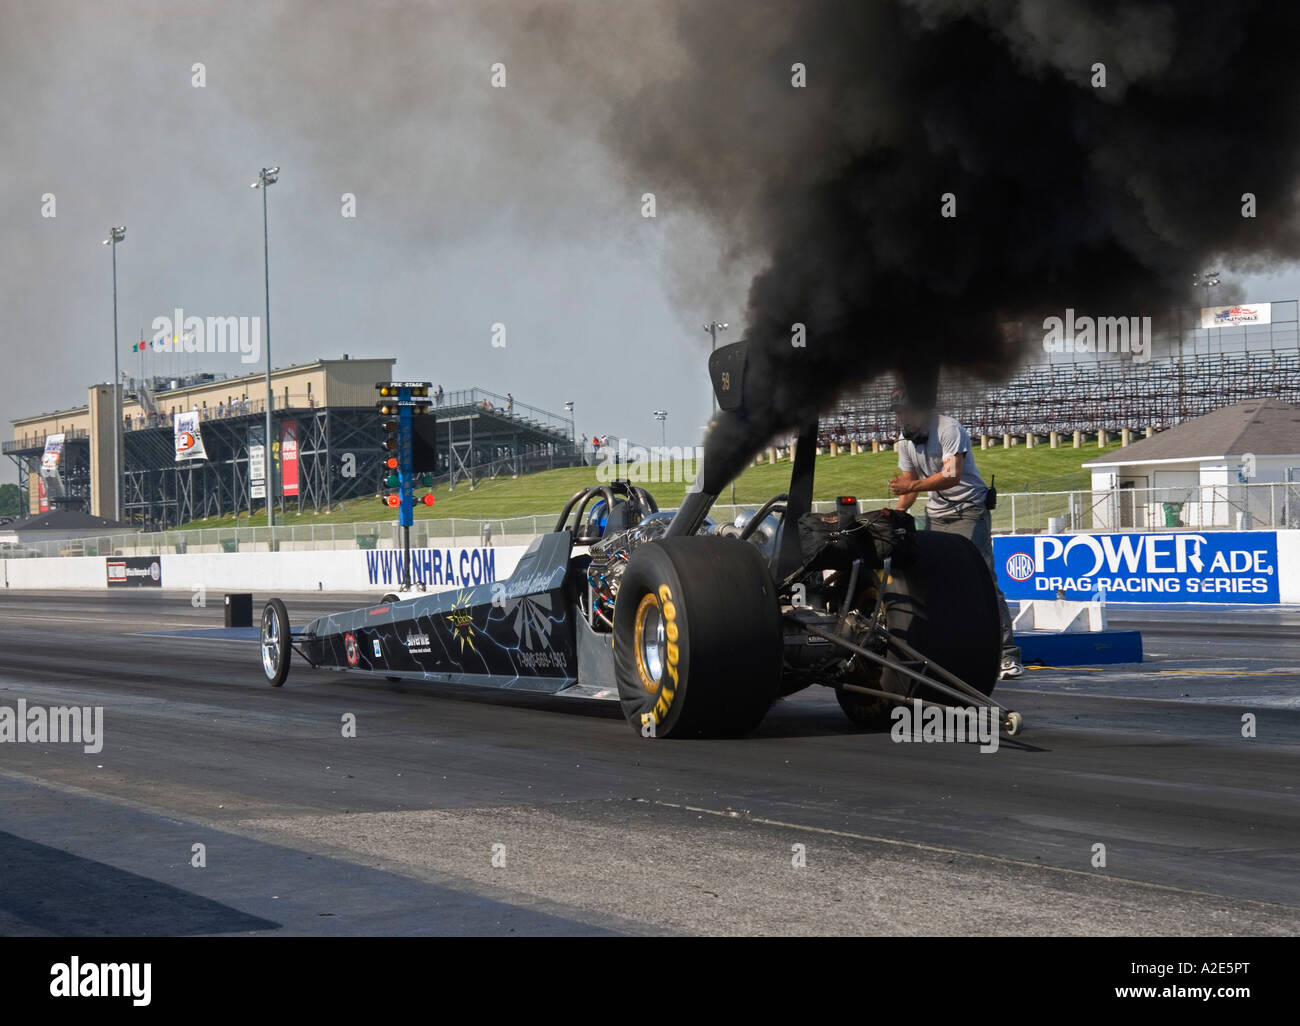 Diesel engine drag racer at Indianapolis race track Stock Photo